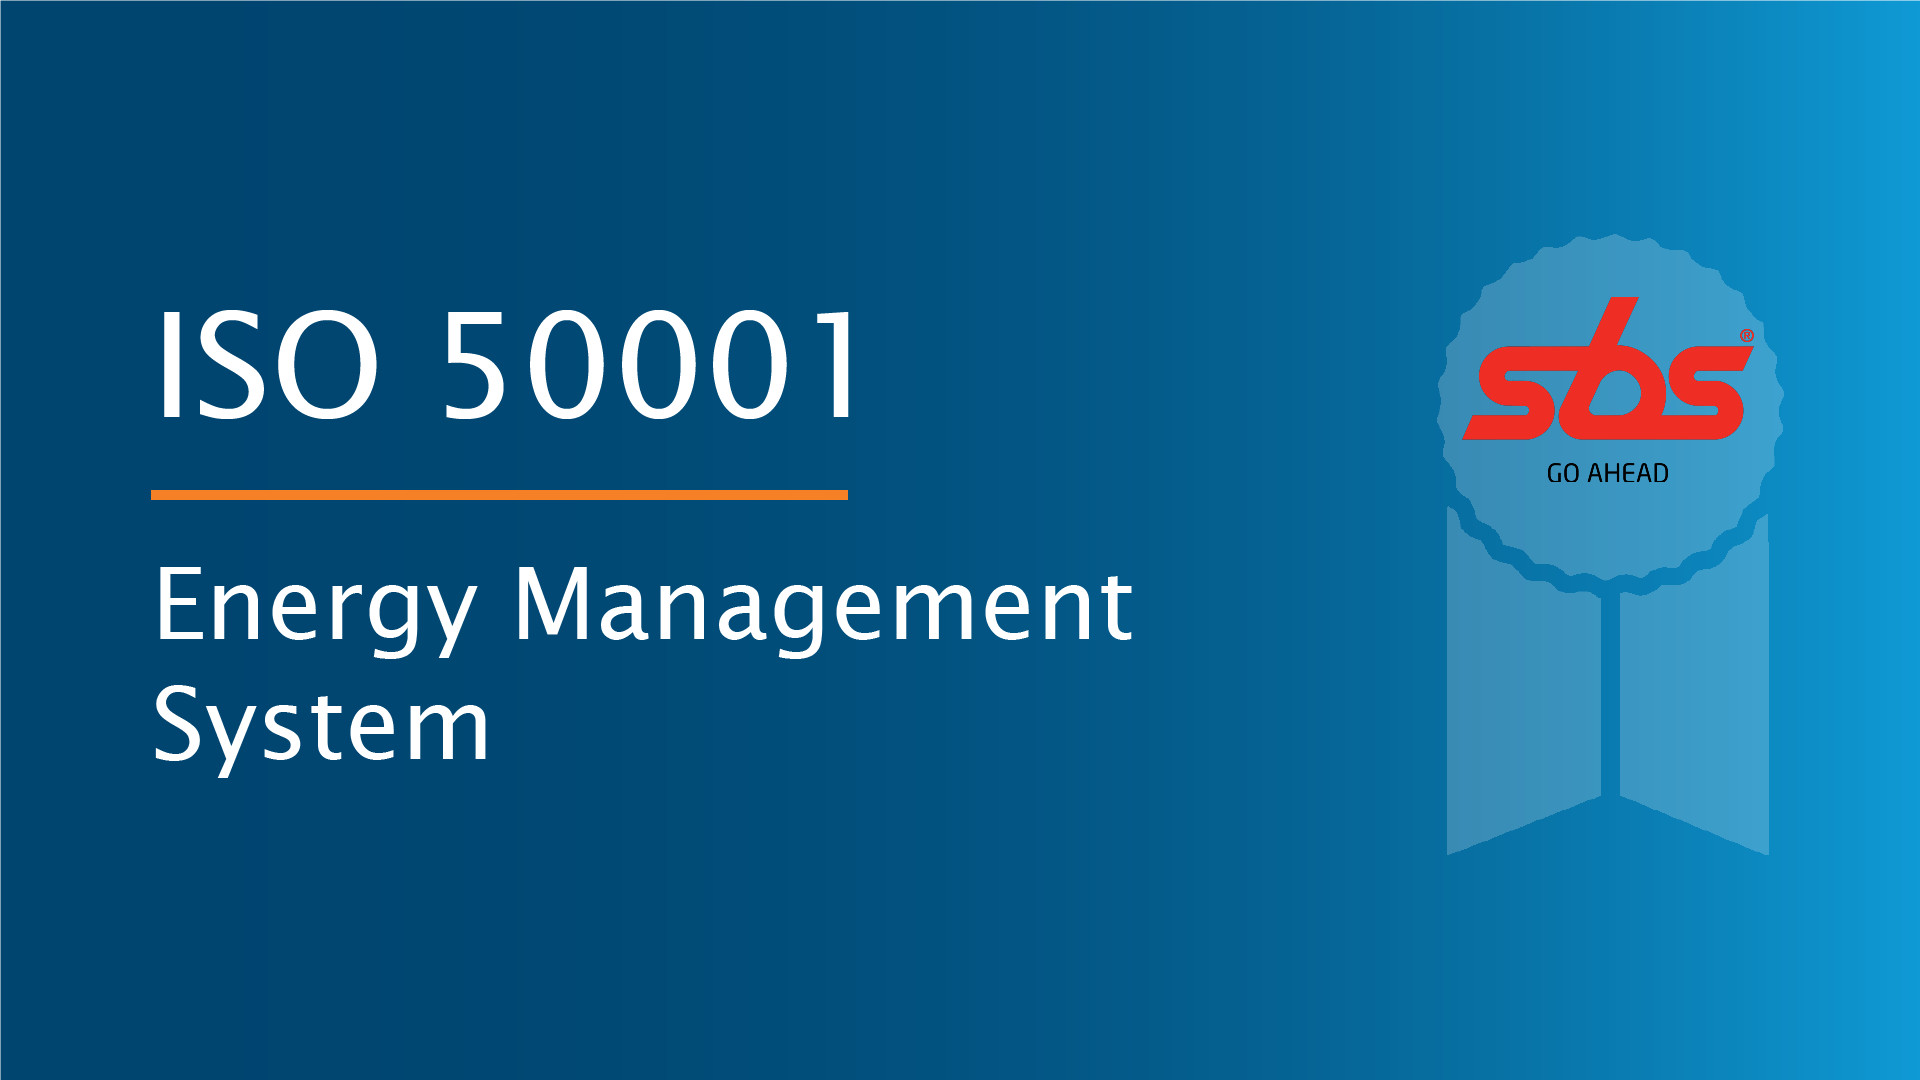 SBS obtains ISO 50001 Energy Management Certification